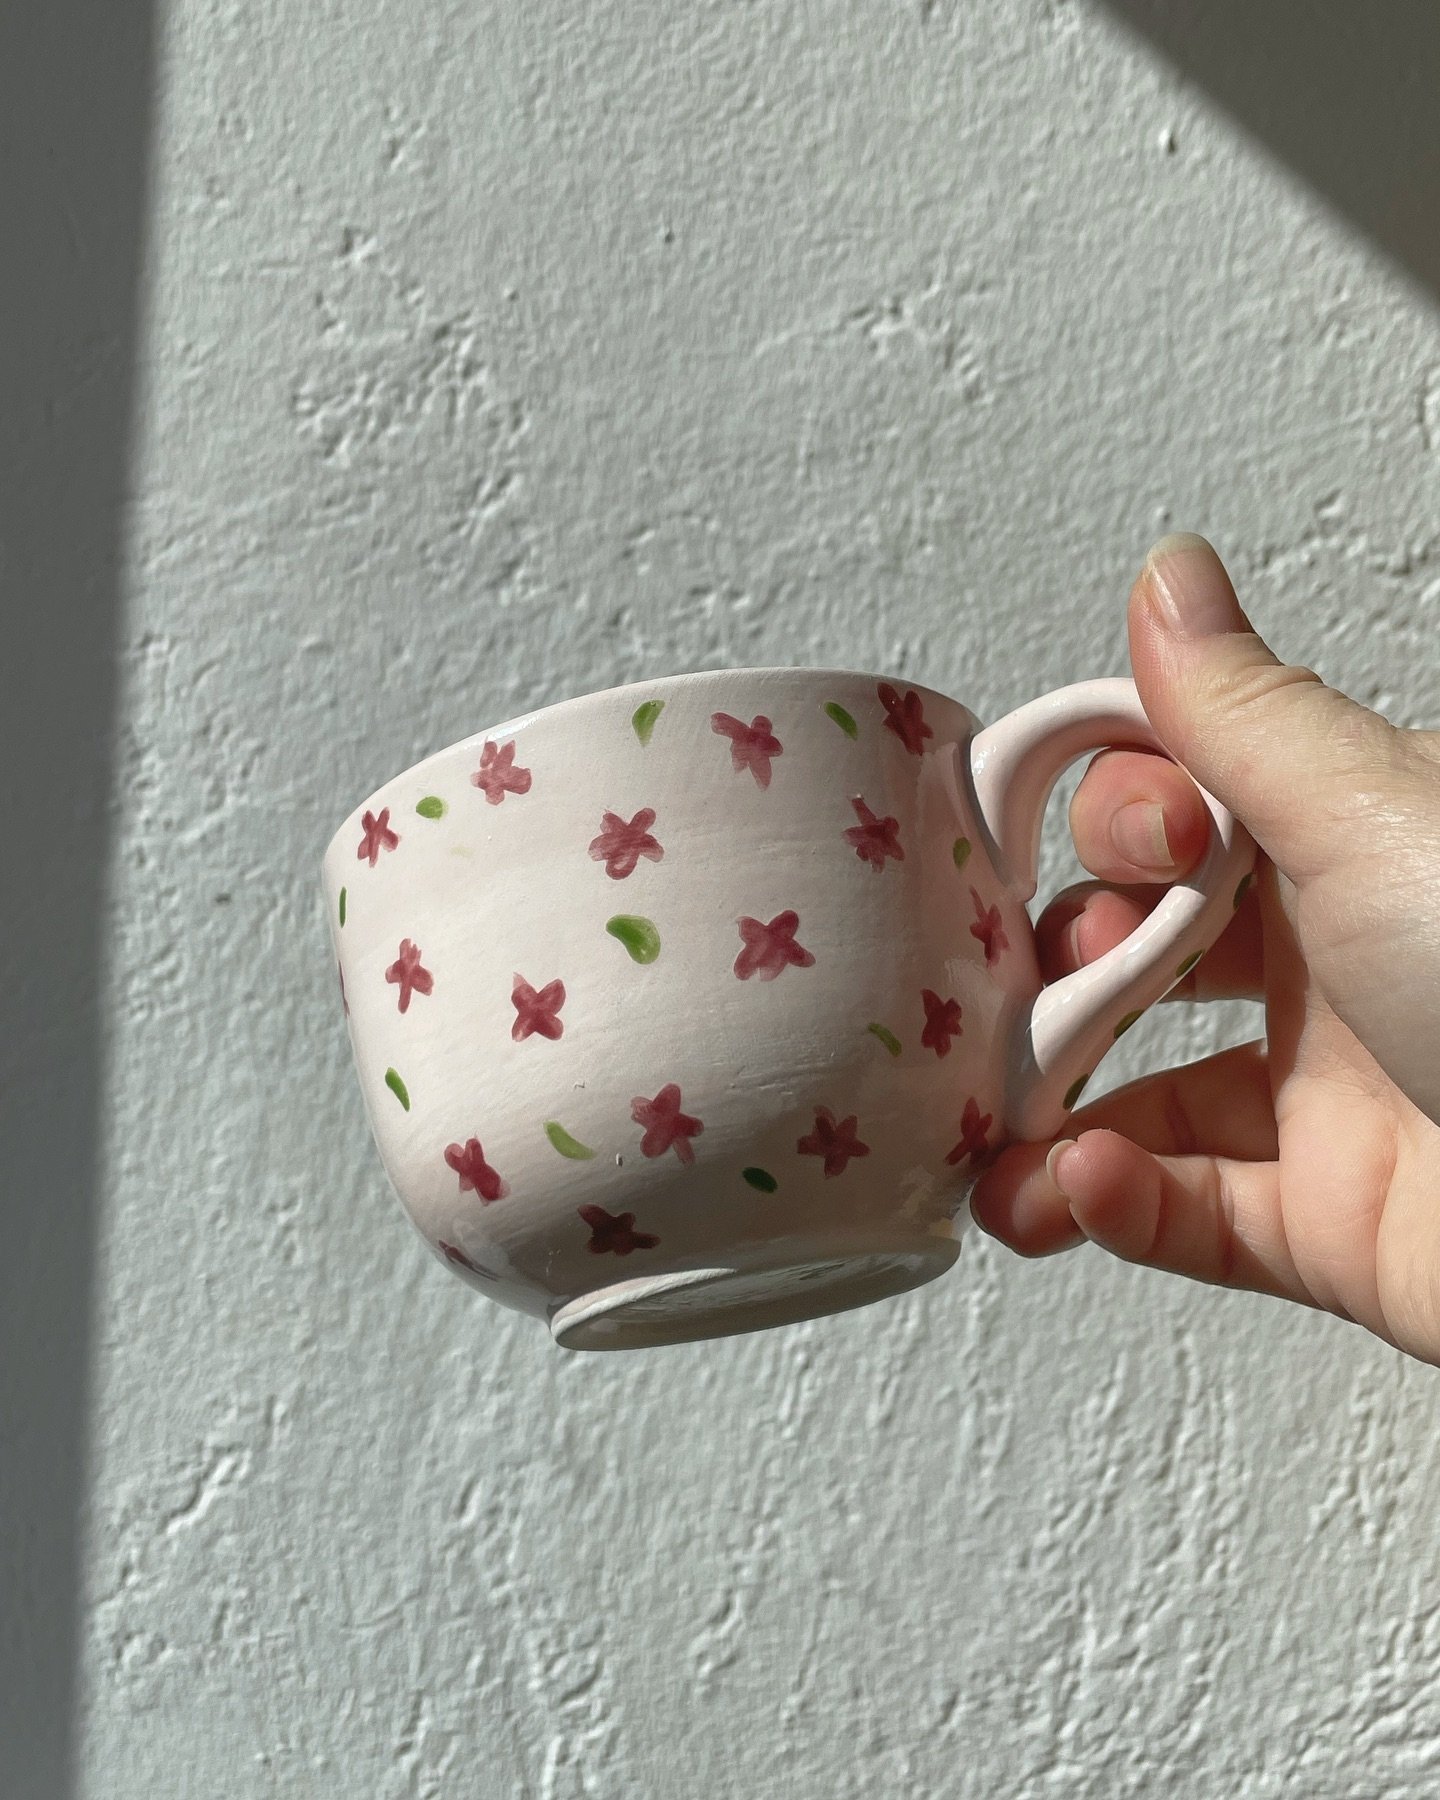 Pottery painting result 🌸 if you want to come create your personalised mug you can join us every second Thursday for a fun night of painting, chatting and sipping 🥂🍾 

Ein Pottery Painting Resultat 🌼 falls du lust hast deine eigene pers&ouml;nlic